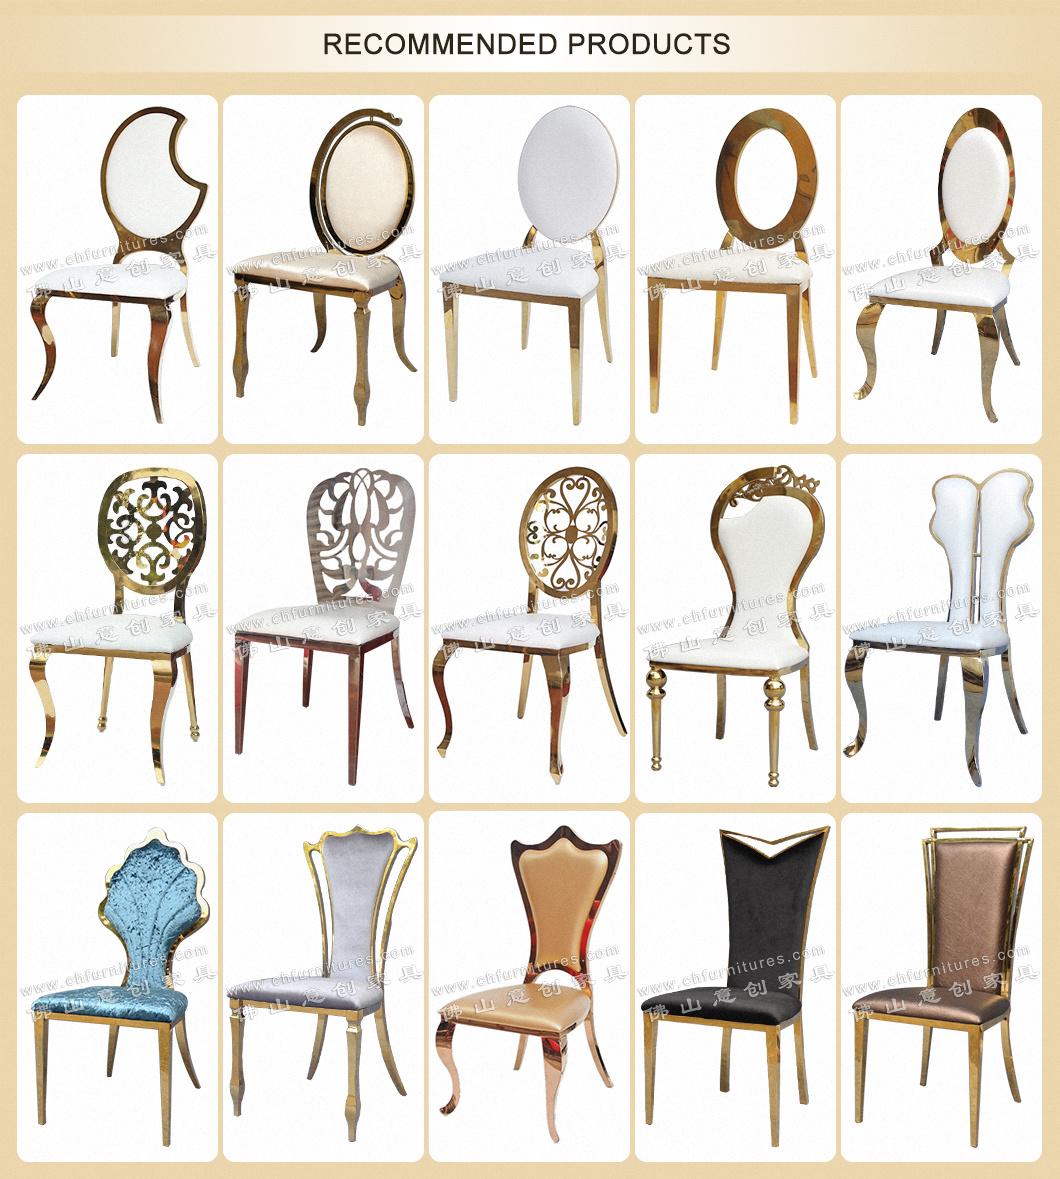 YCX-SS28 Modern Gold Metal Dining Chair for Wedding